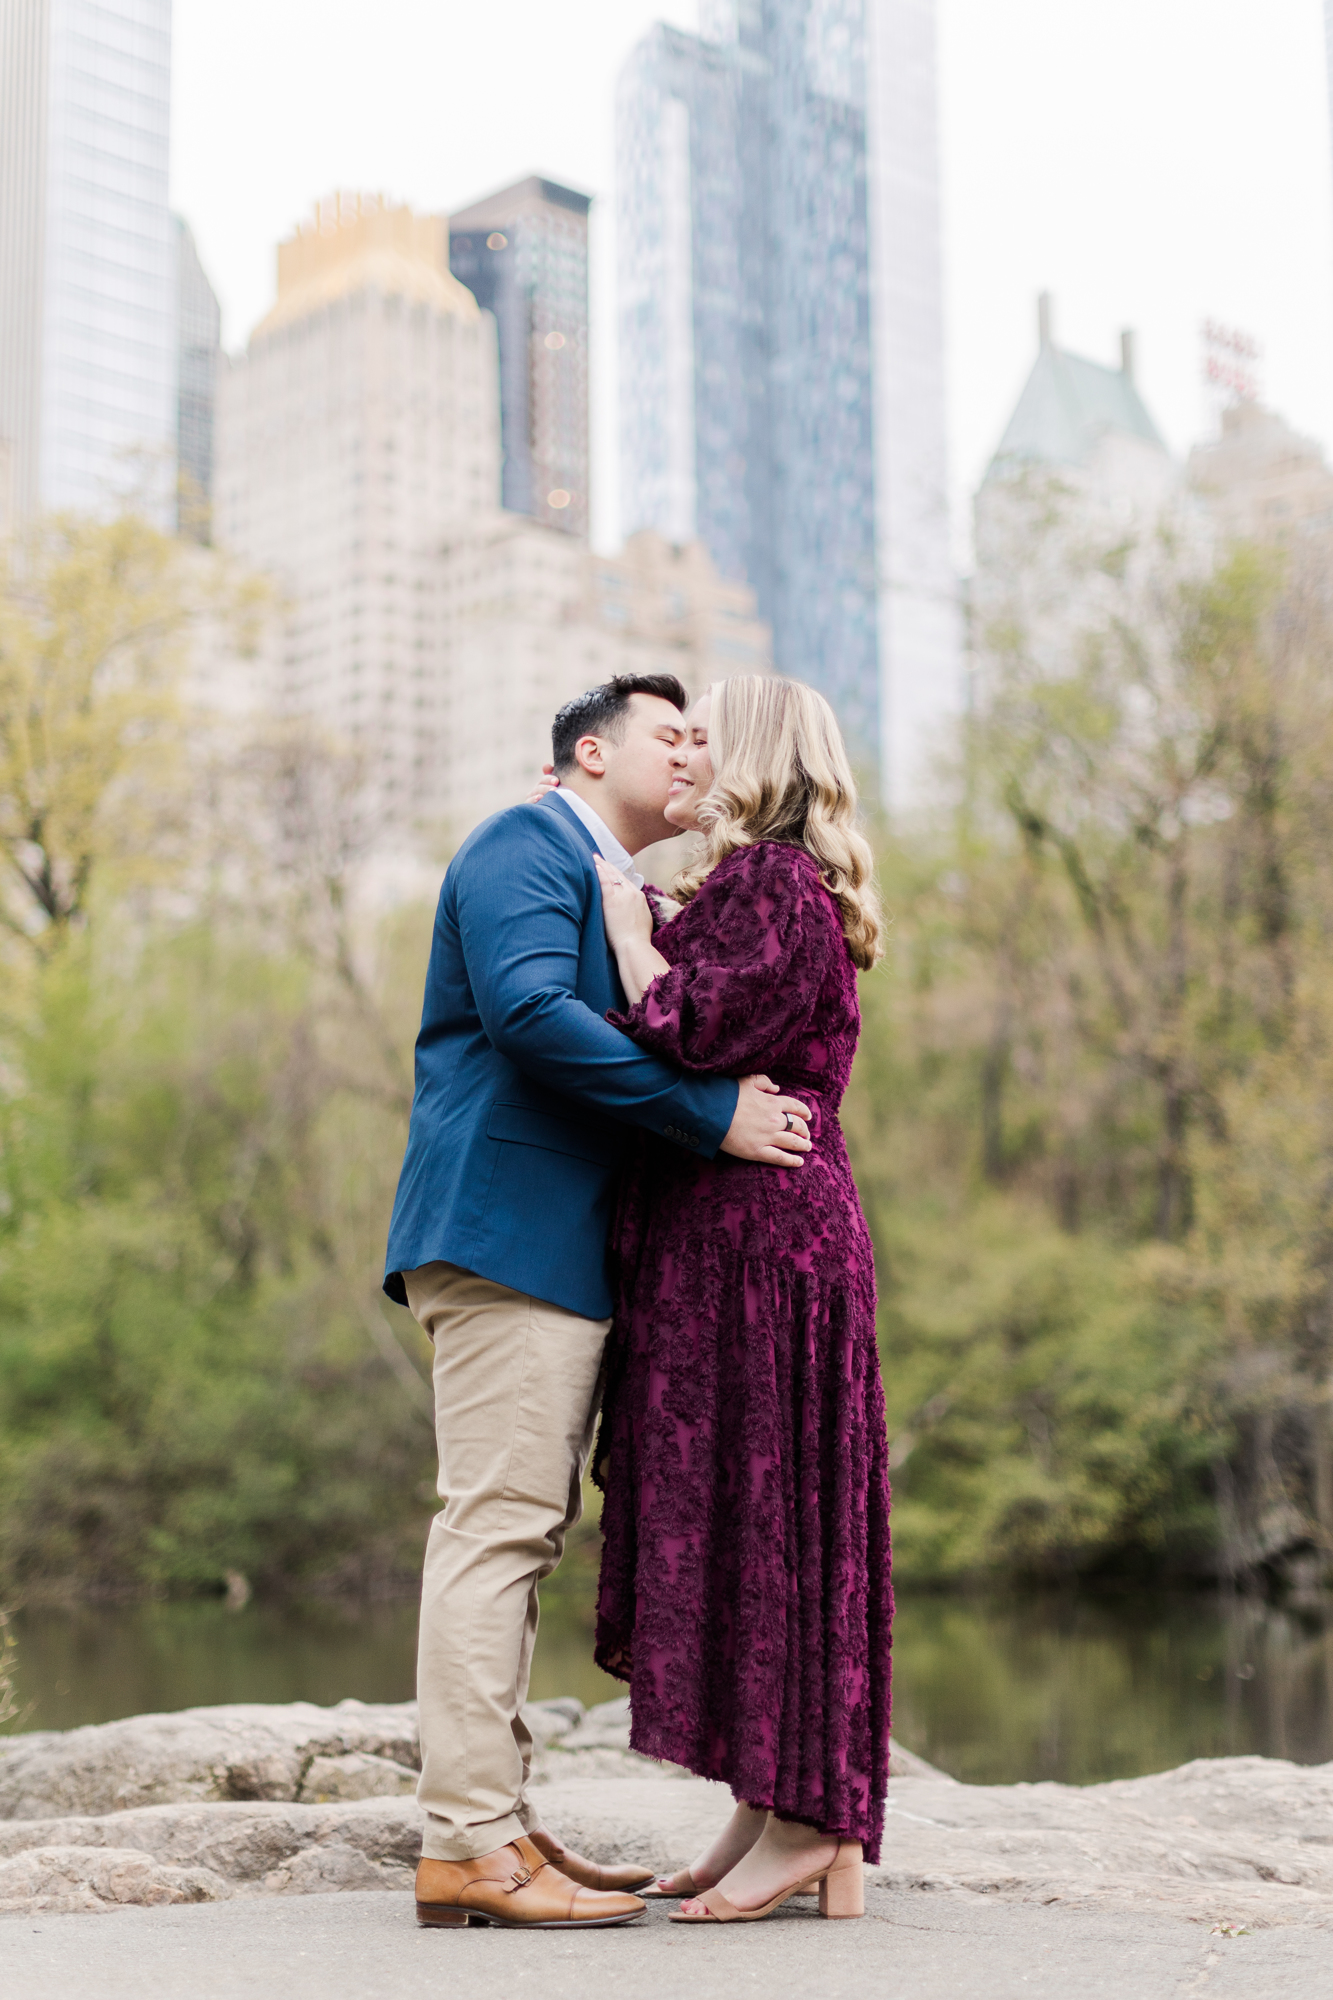 Wonderful Engagement Pictures in Central Park